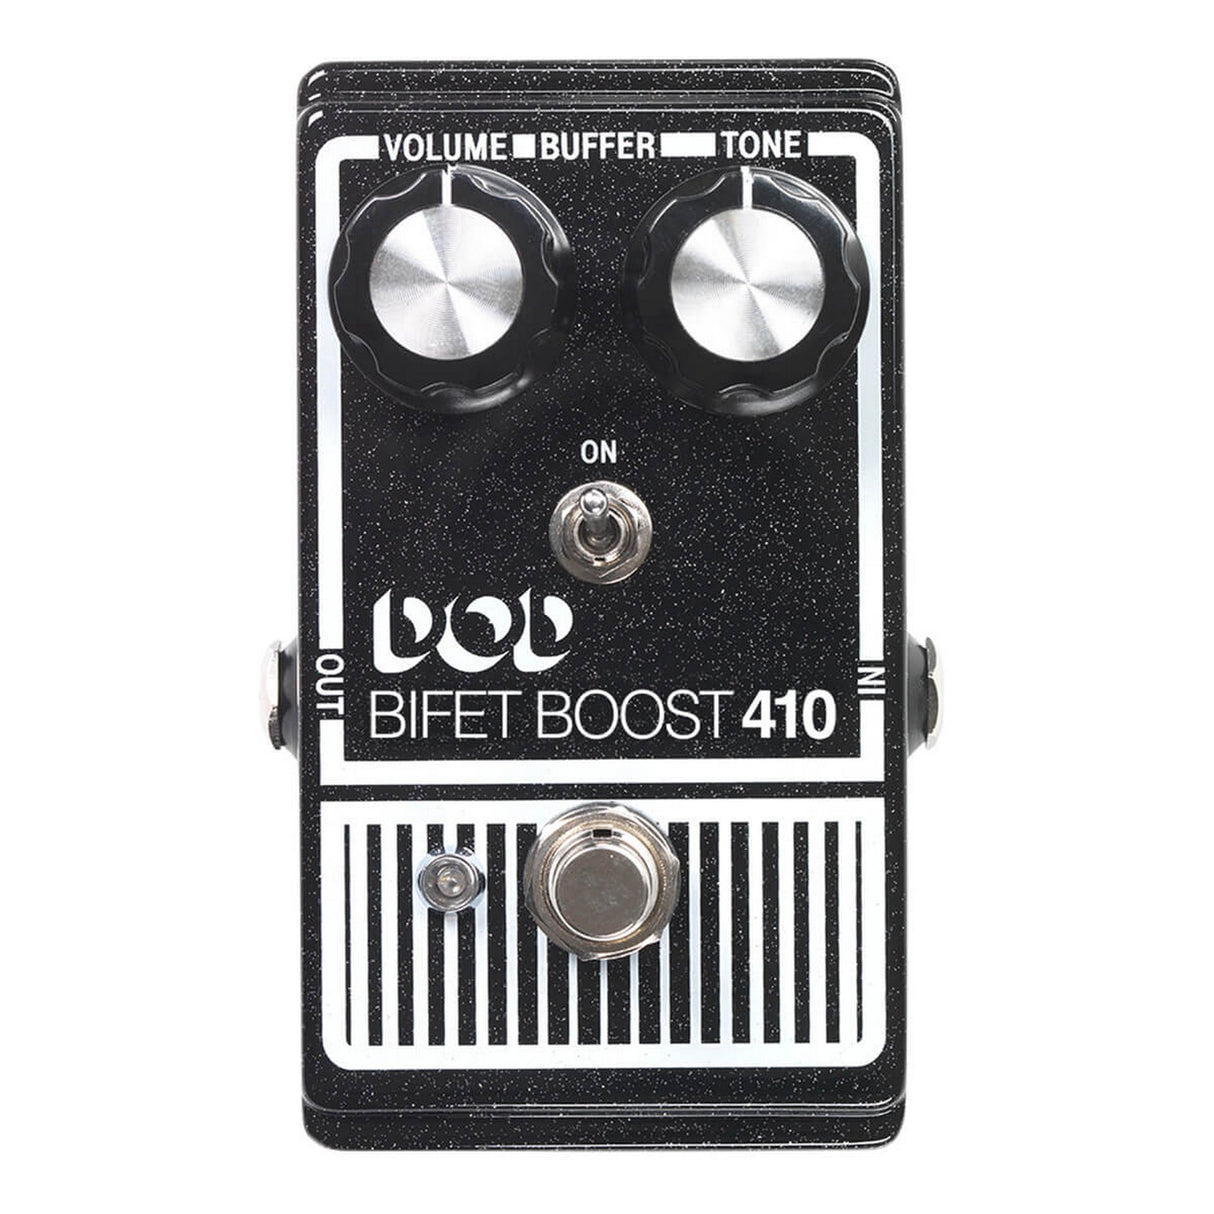 DigiTech DOD Bifet Boost 410 Guitar Effects Pedal with Selectable Buffer